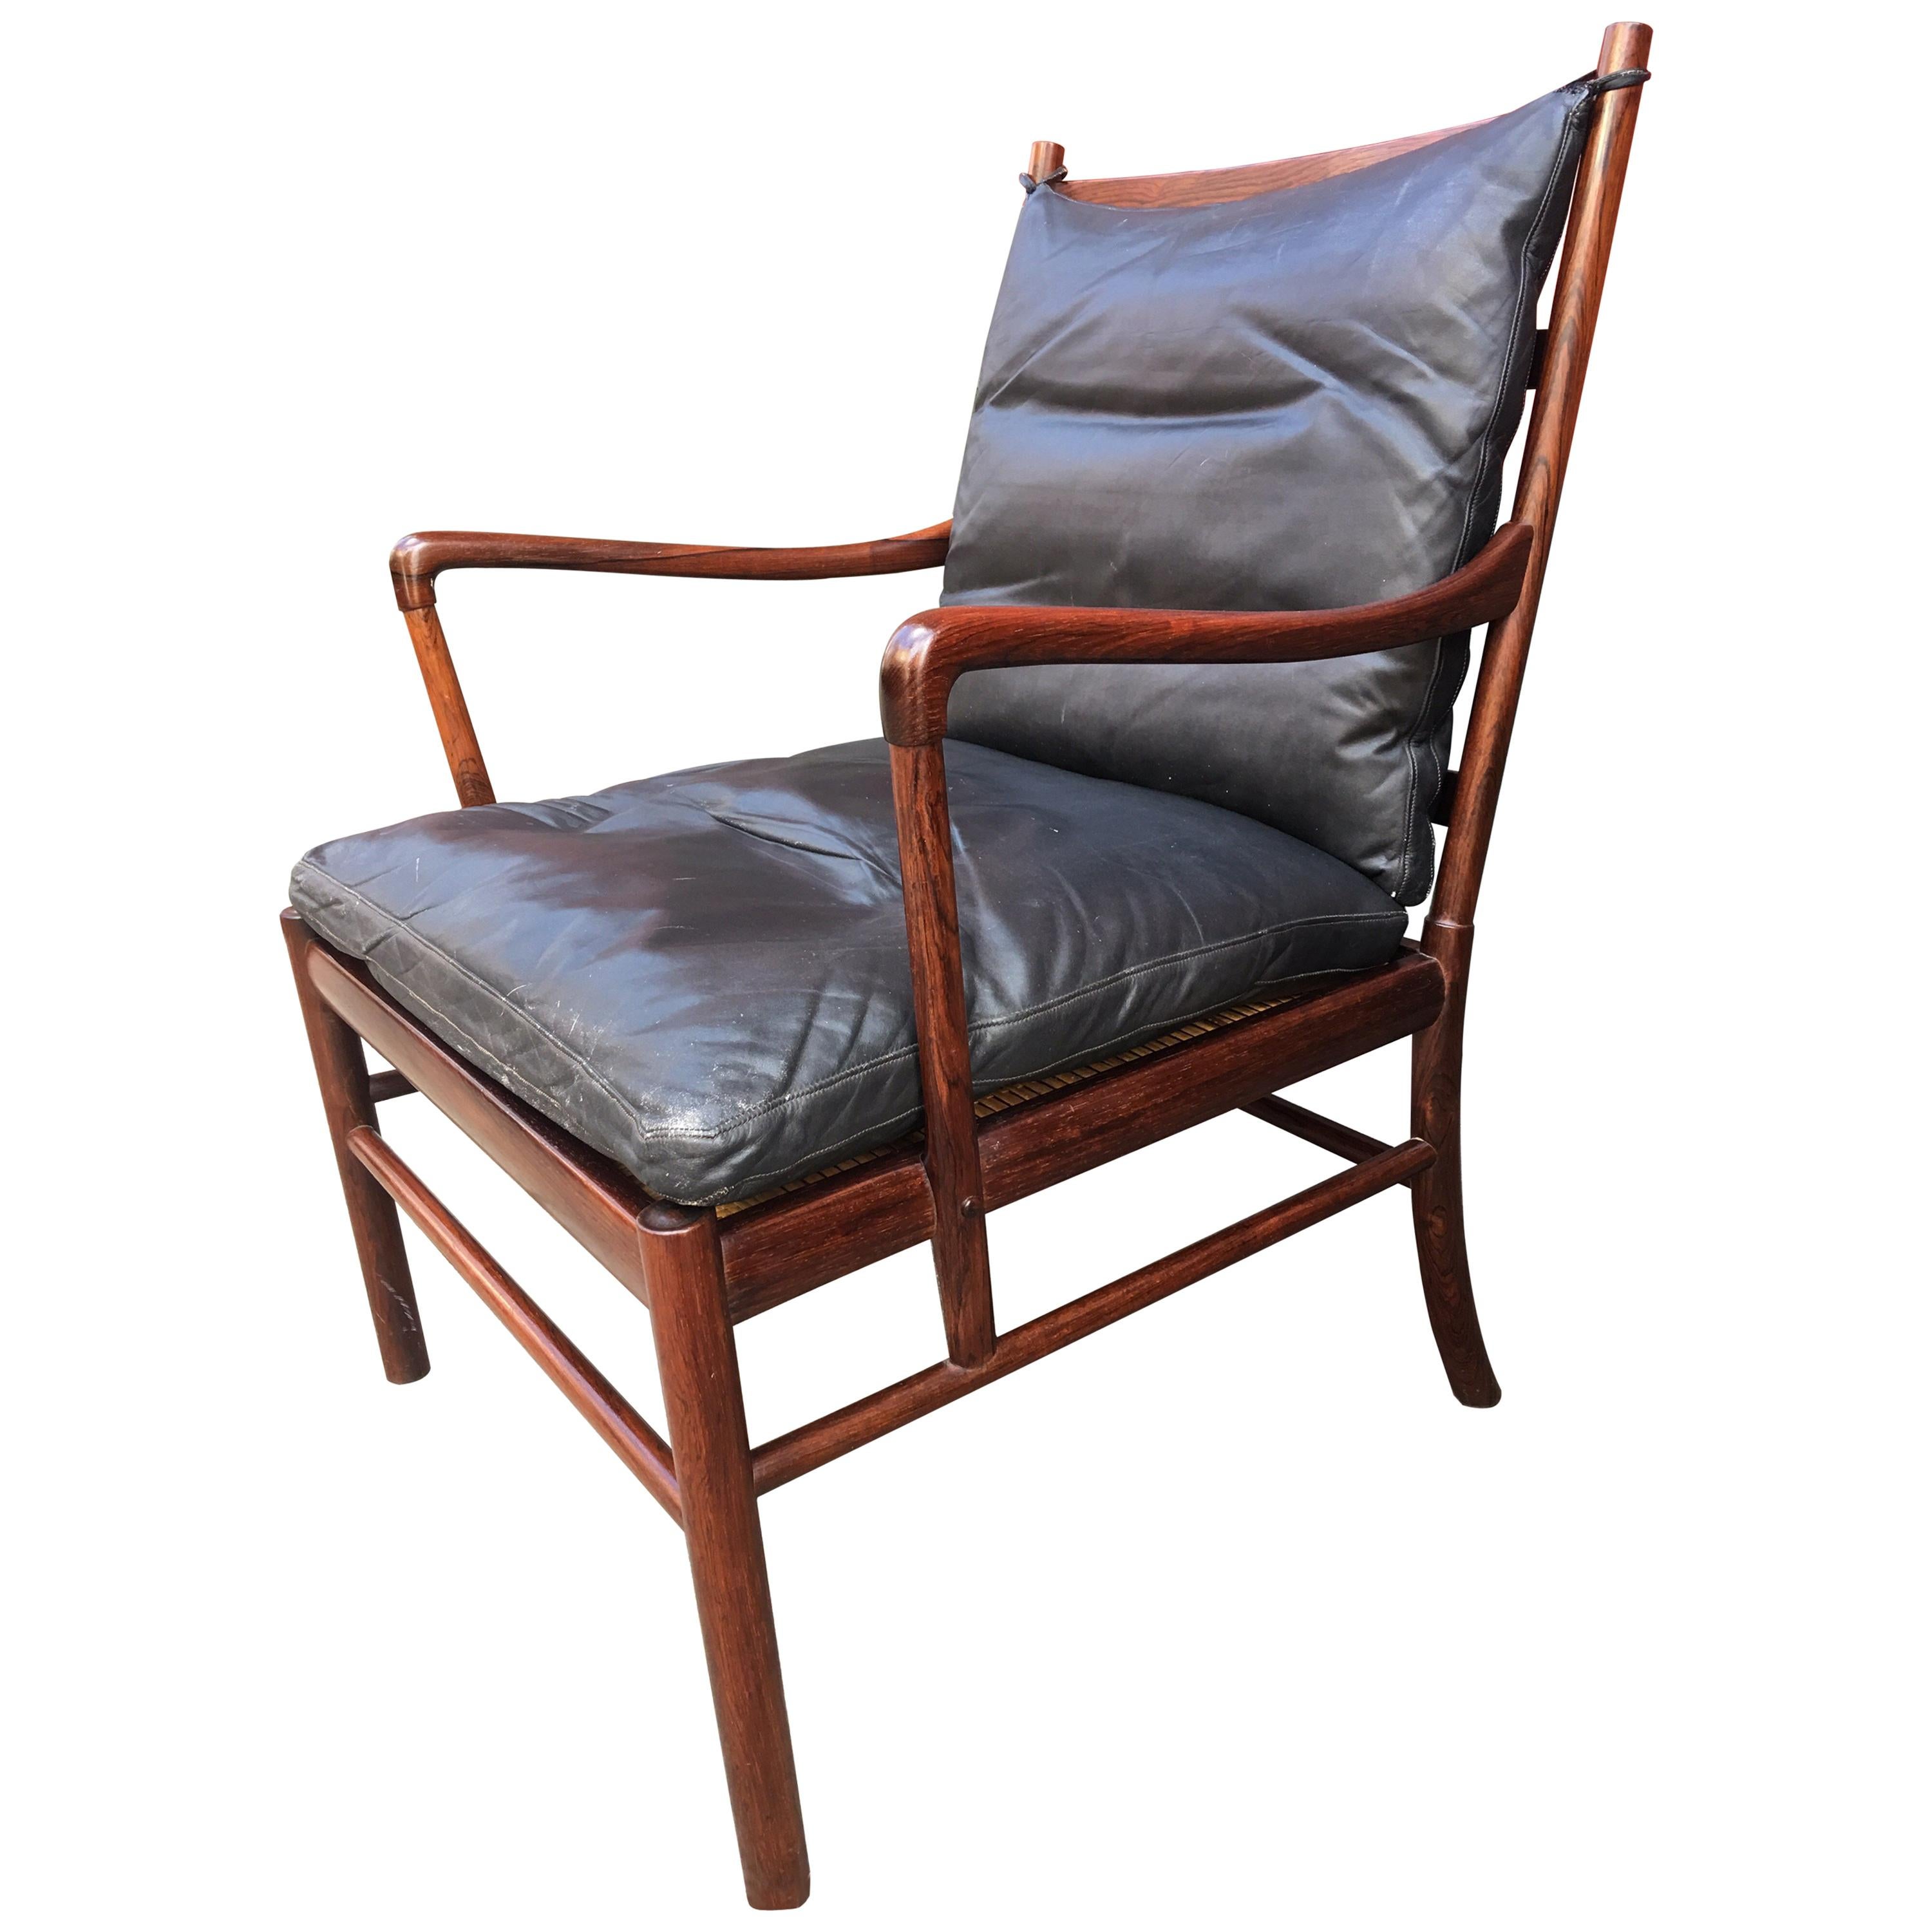 Ole Wanscher for Poul Jeppeson Rosewood Colonial Chair with Black Leather